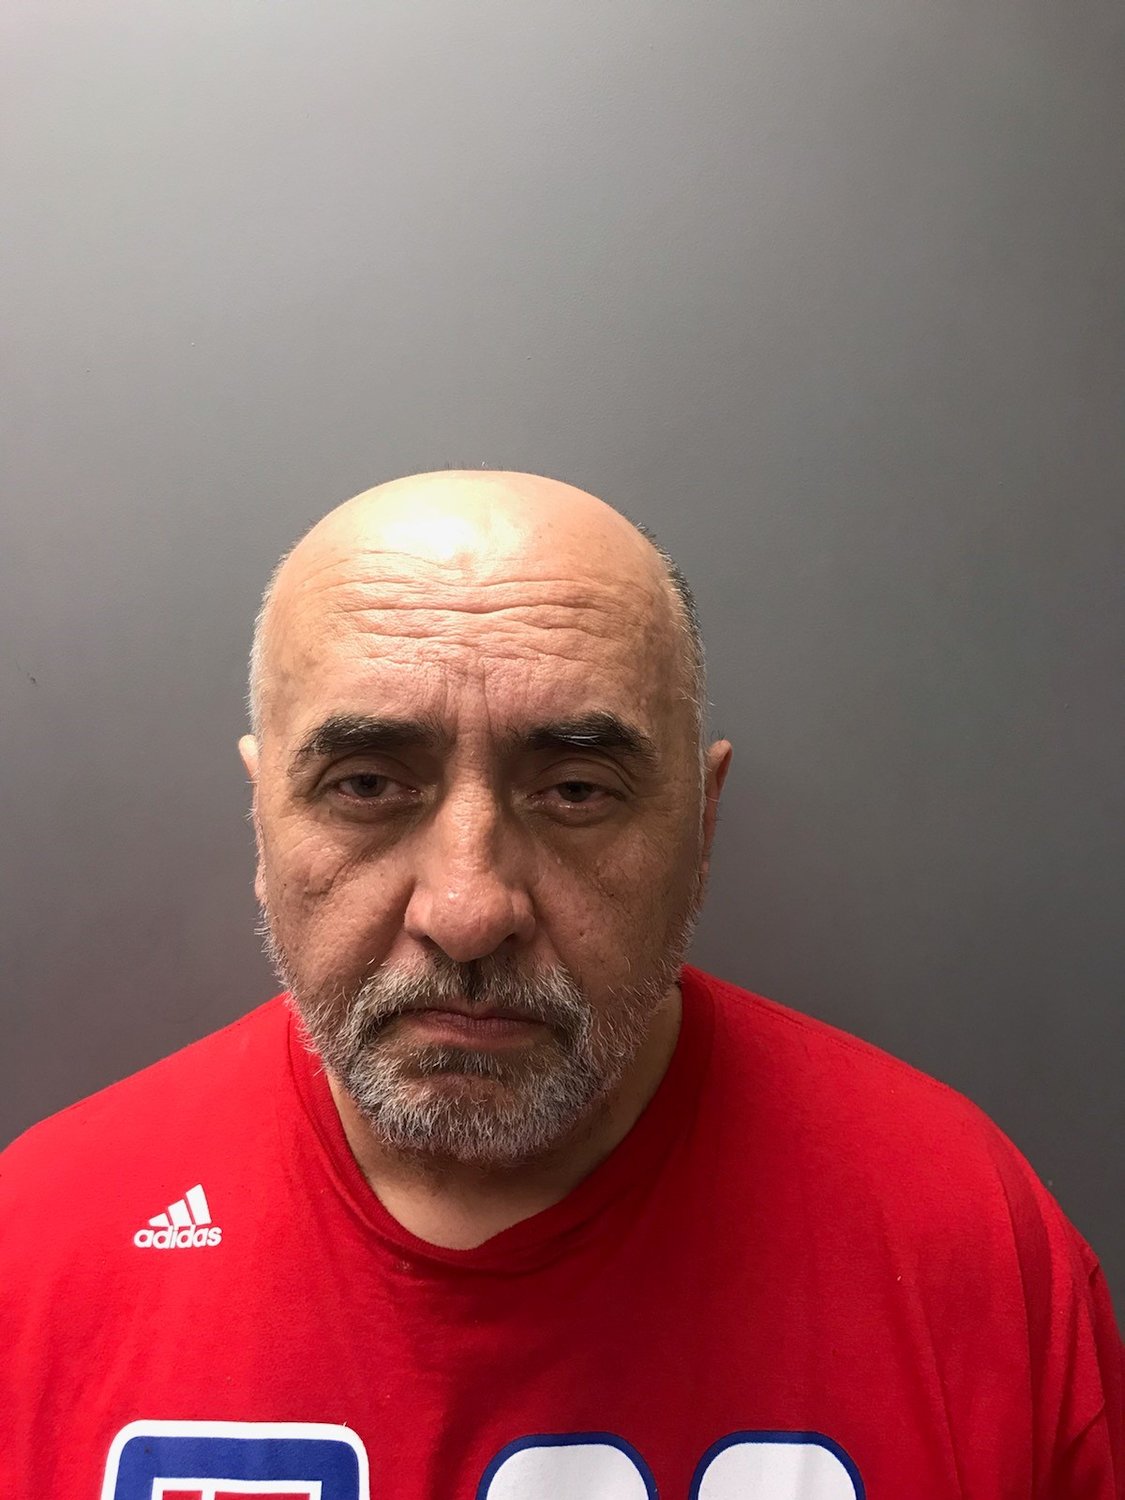 Lino A. Loyola of Middletown, as he appeared in his Portsmouth Police booking photo. He was arrested Tuesday and charged with breaking into 15 Point Road Restaurant in Island Park.